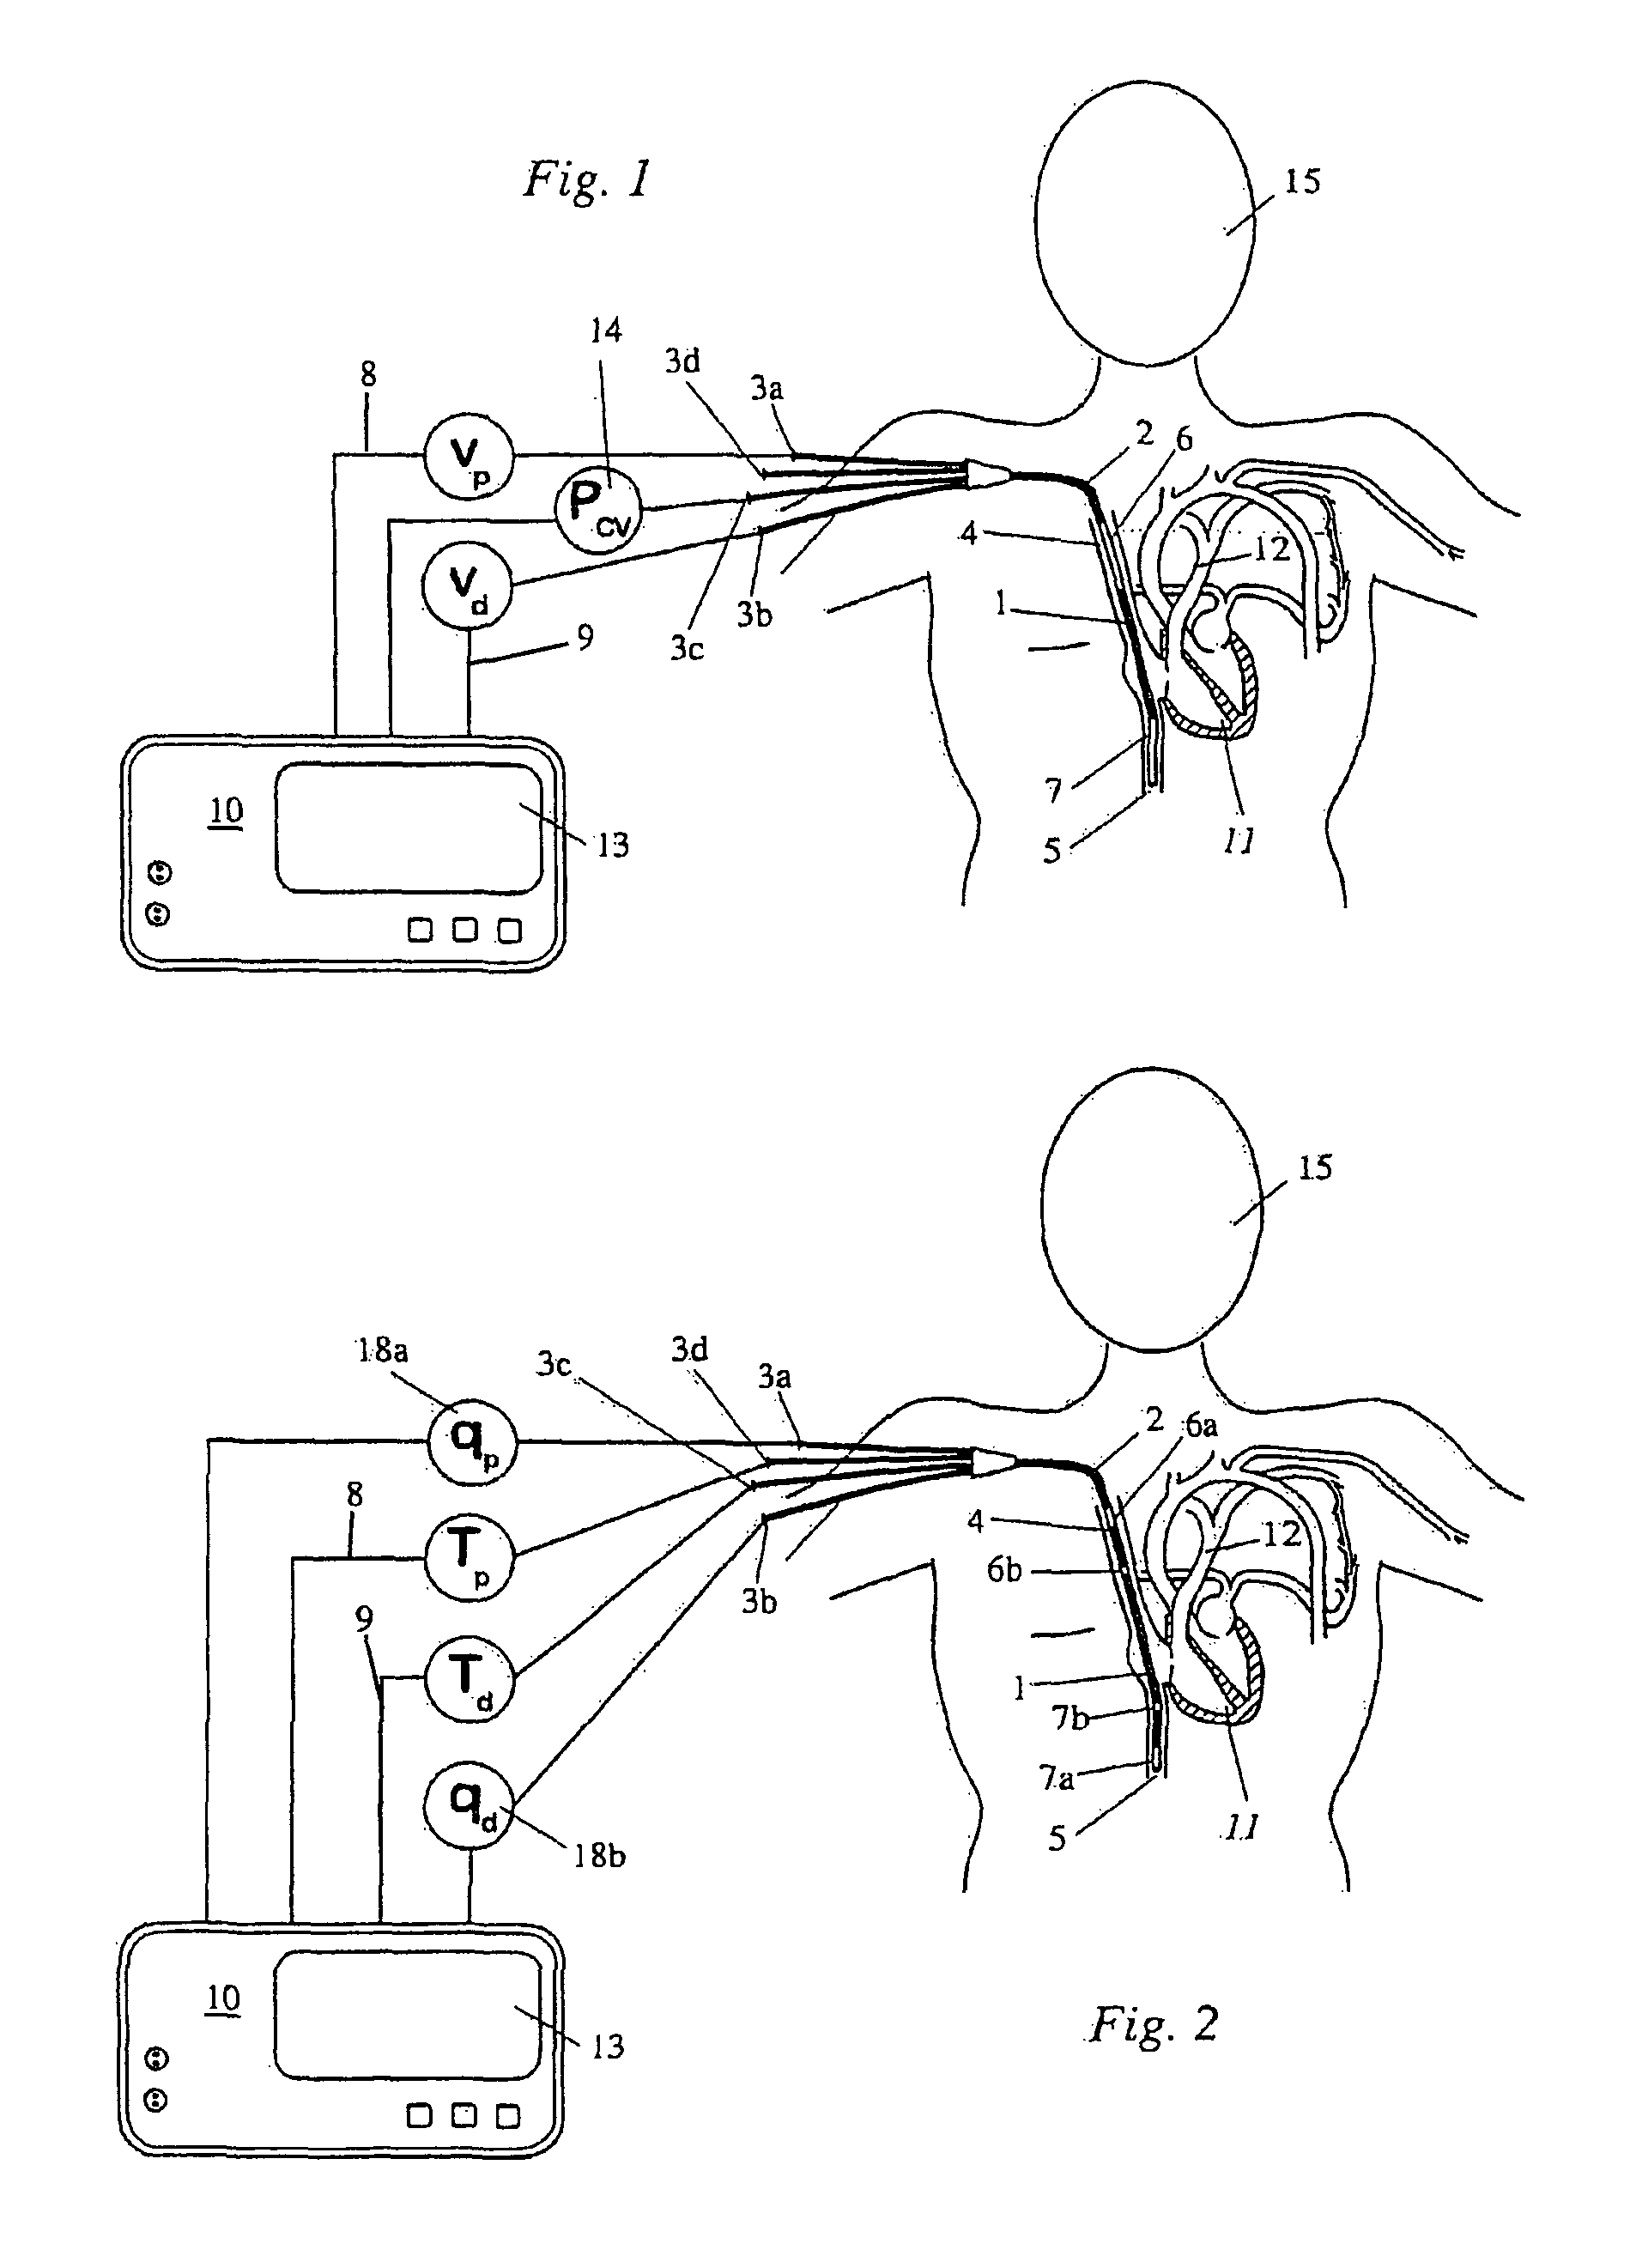 Central venous catheter assembly for measuring physiological data for cardiac output determination and method of determining cardiac output